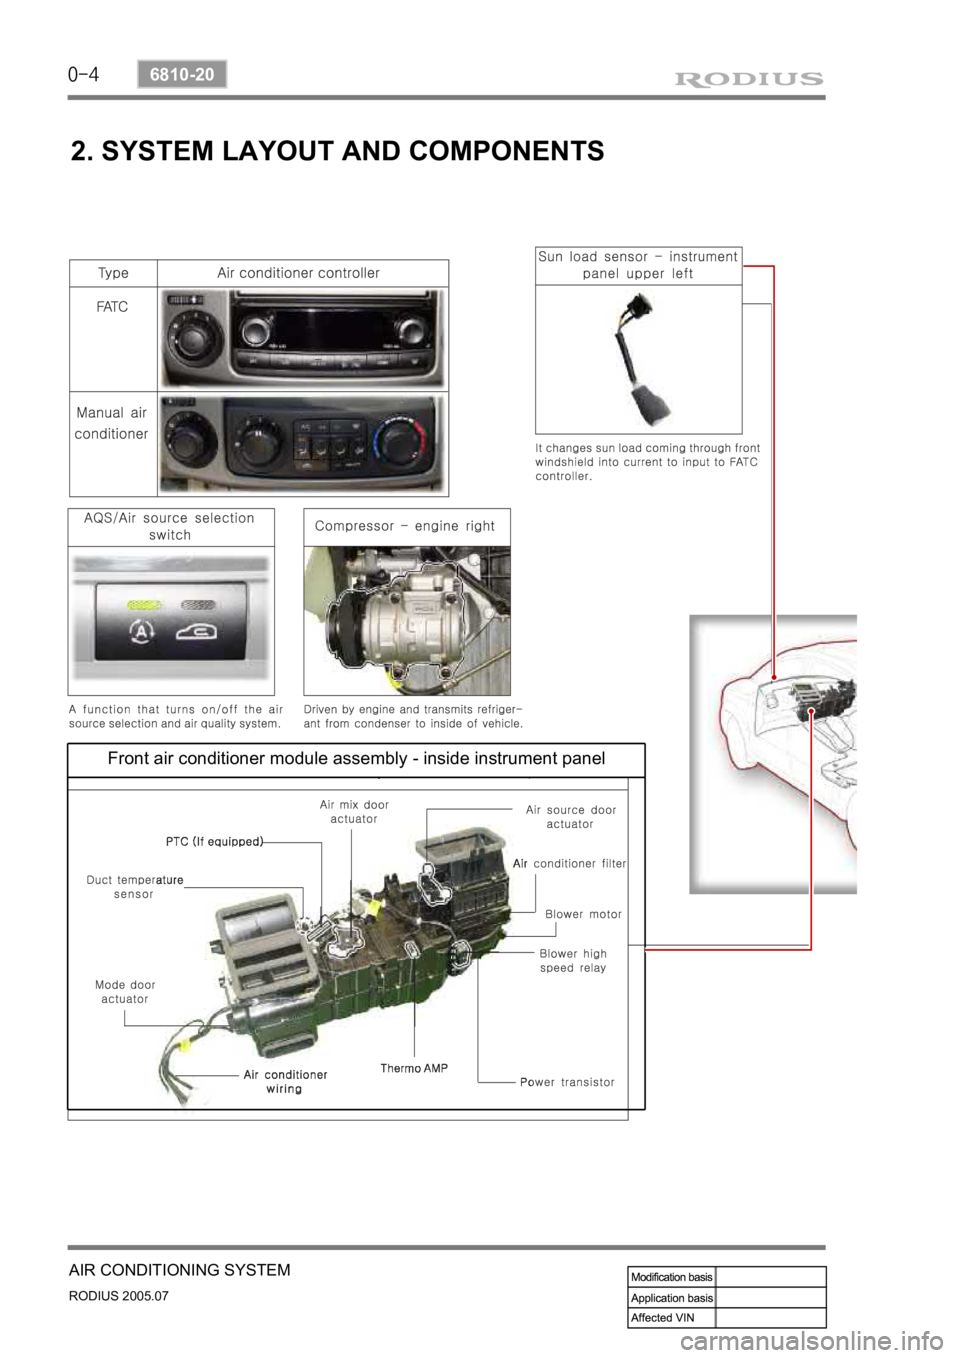 SSANGYONG RODIUS 2005  Service Manual 0-4
RODIUS 2005.07
6810-20 
AIR CONDITIONING SYSTEM
2. SYSTEM LAYOUT AND COMPONENTS
Front air conditioner module assembly - inside instrument panel 